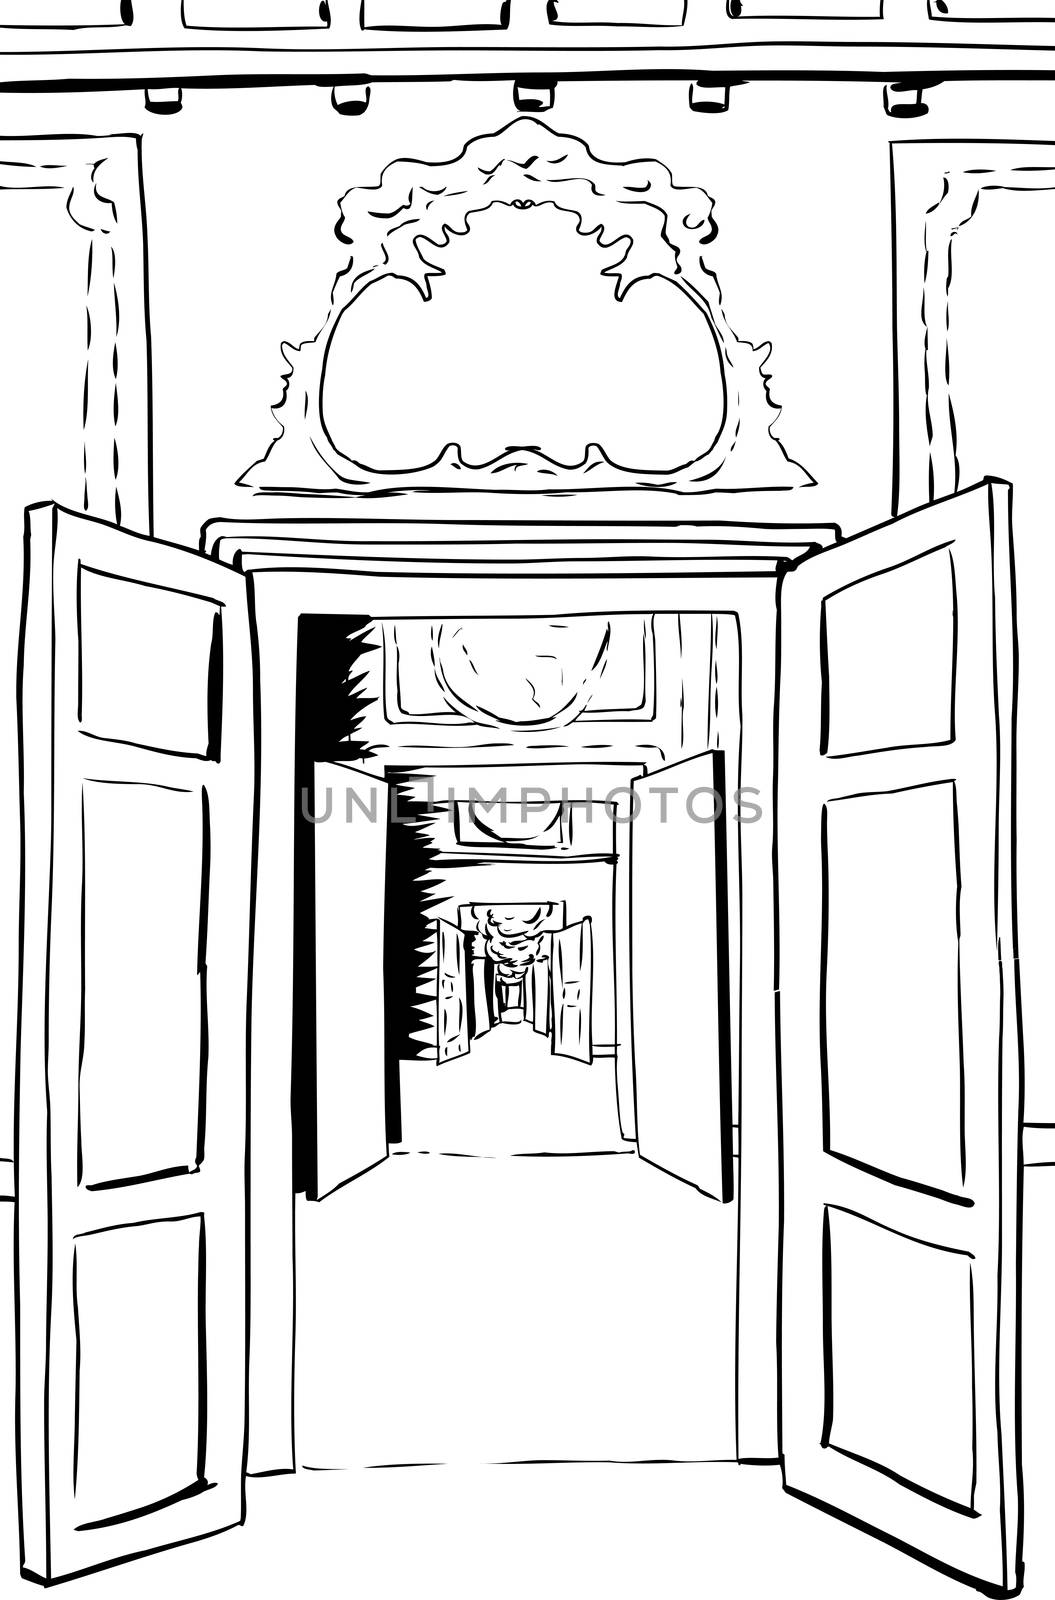 Outline illustration of one point perspective view between multiple doorways through halls in Stockholm palace